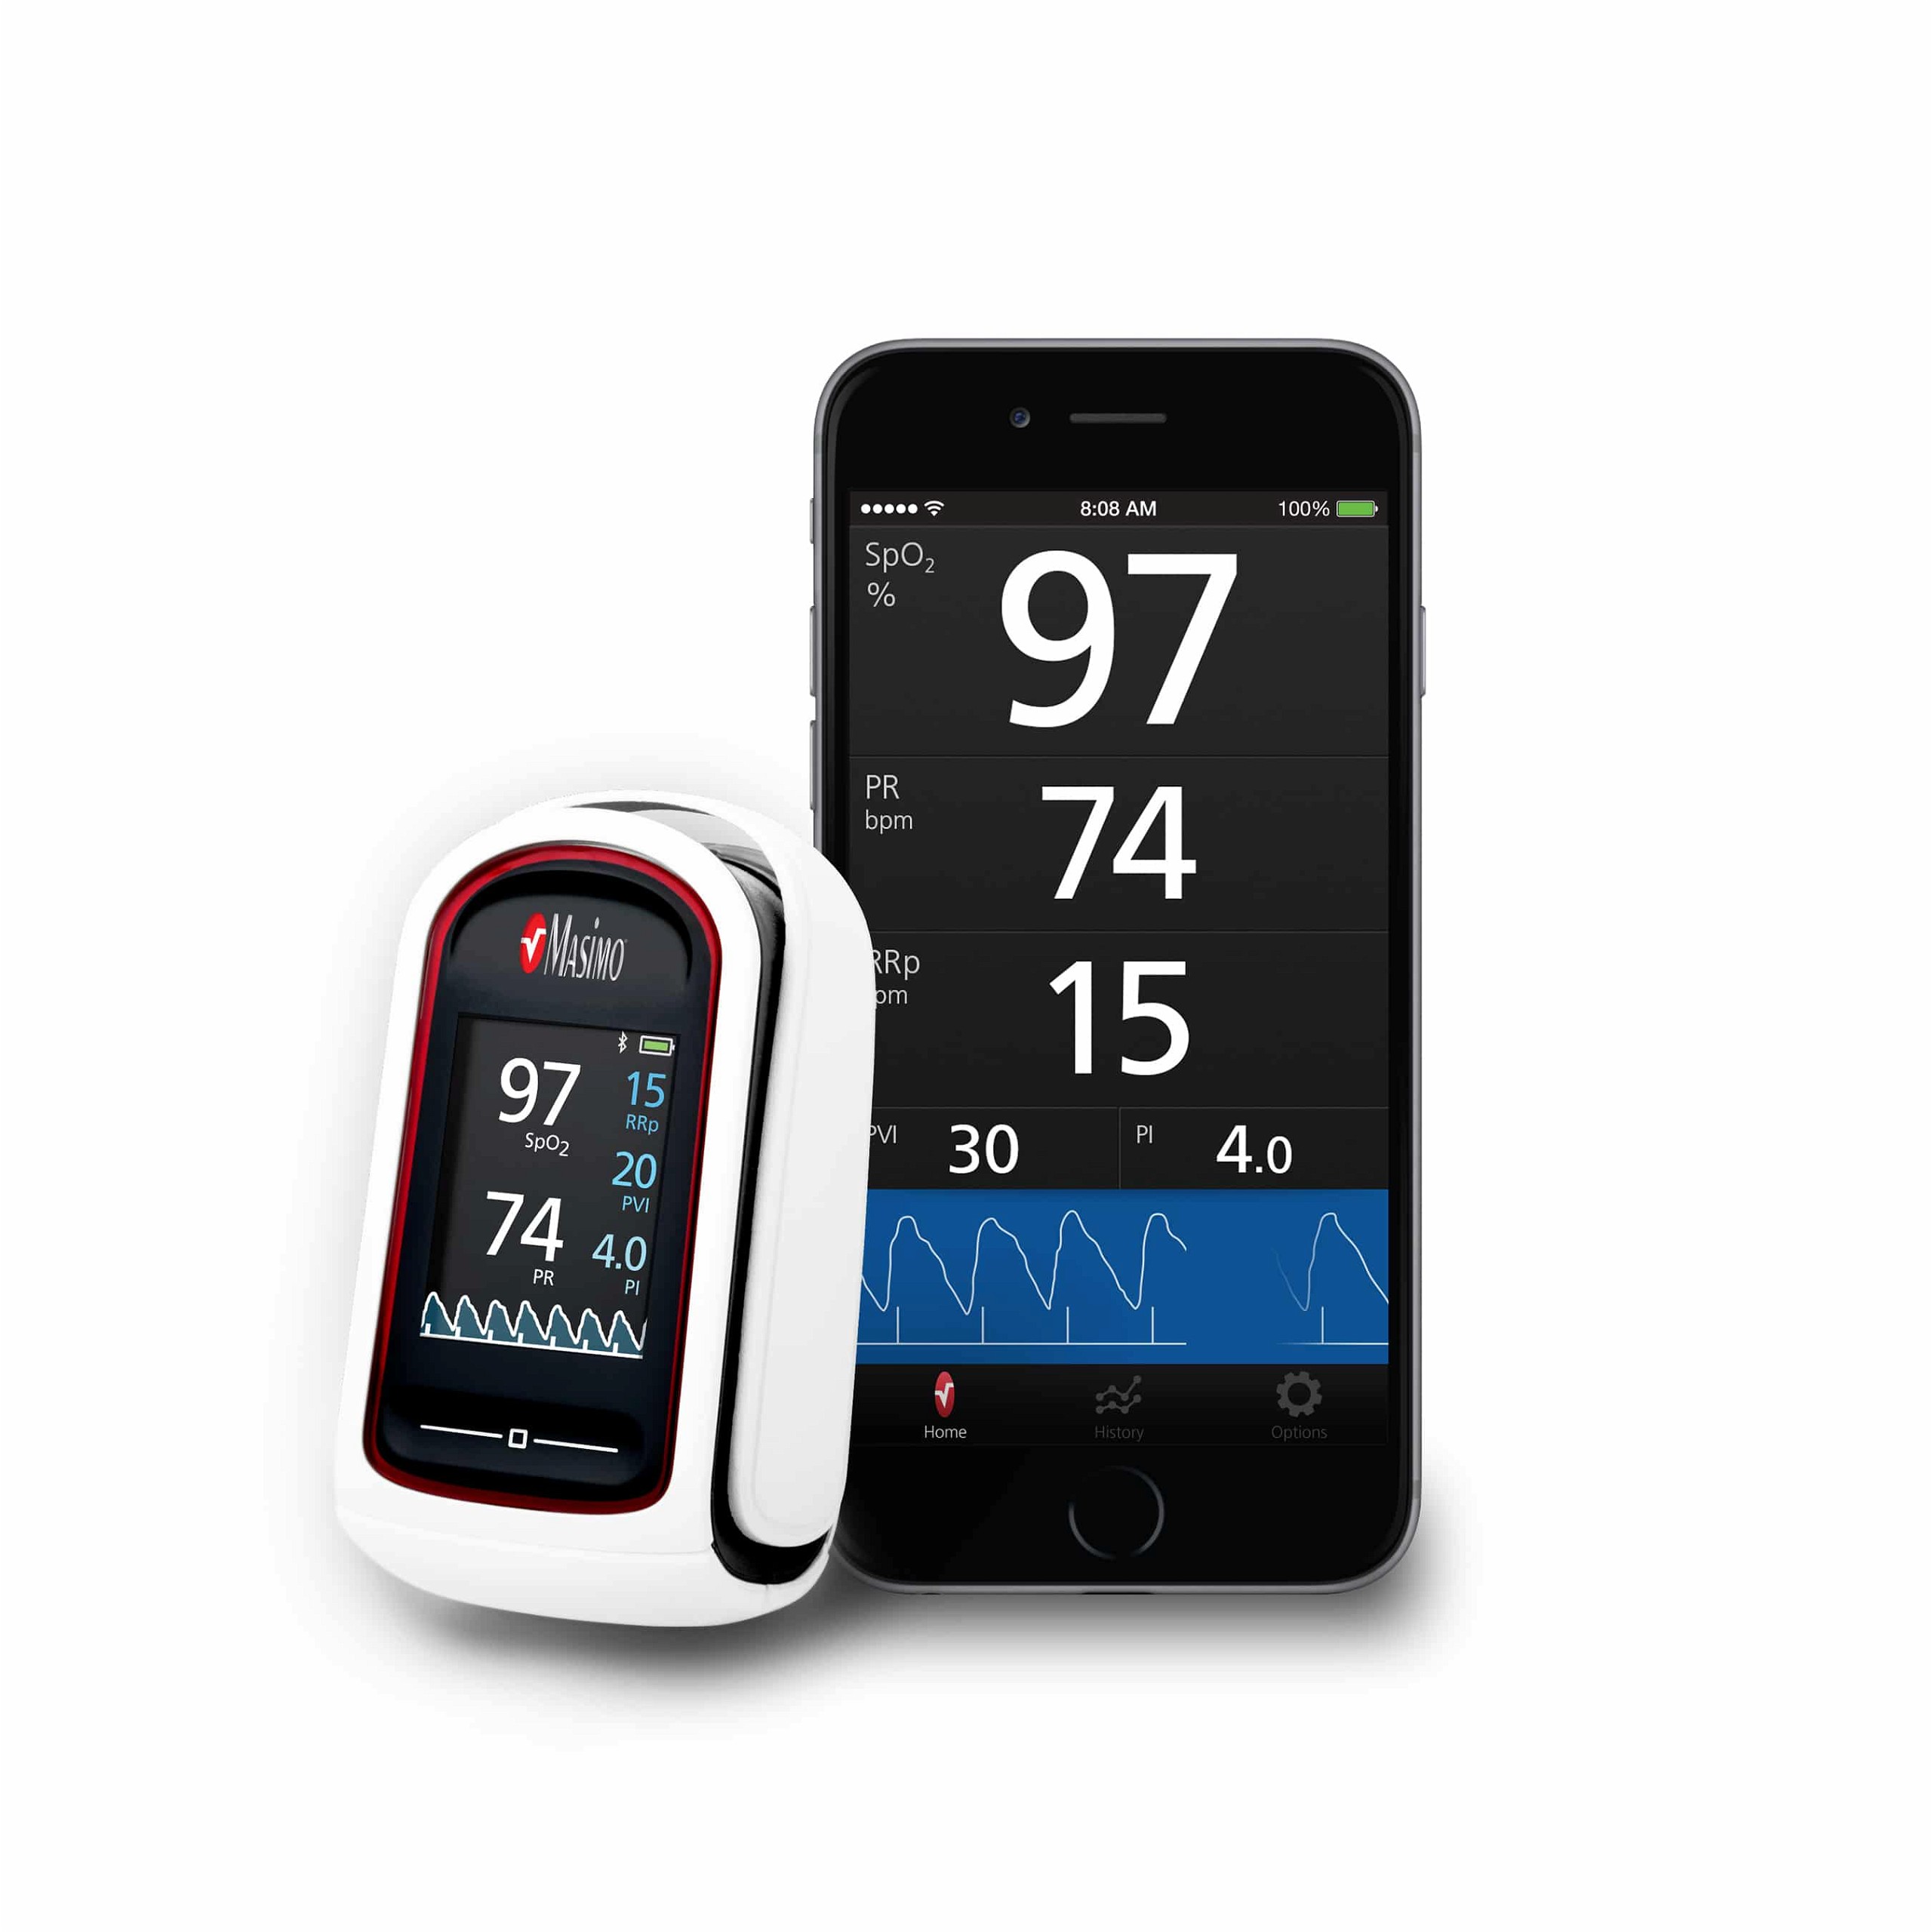 The Masimo "MightySat" and it's companion interface on the App for iPhone6